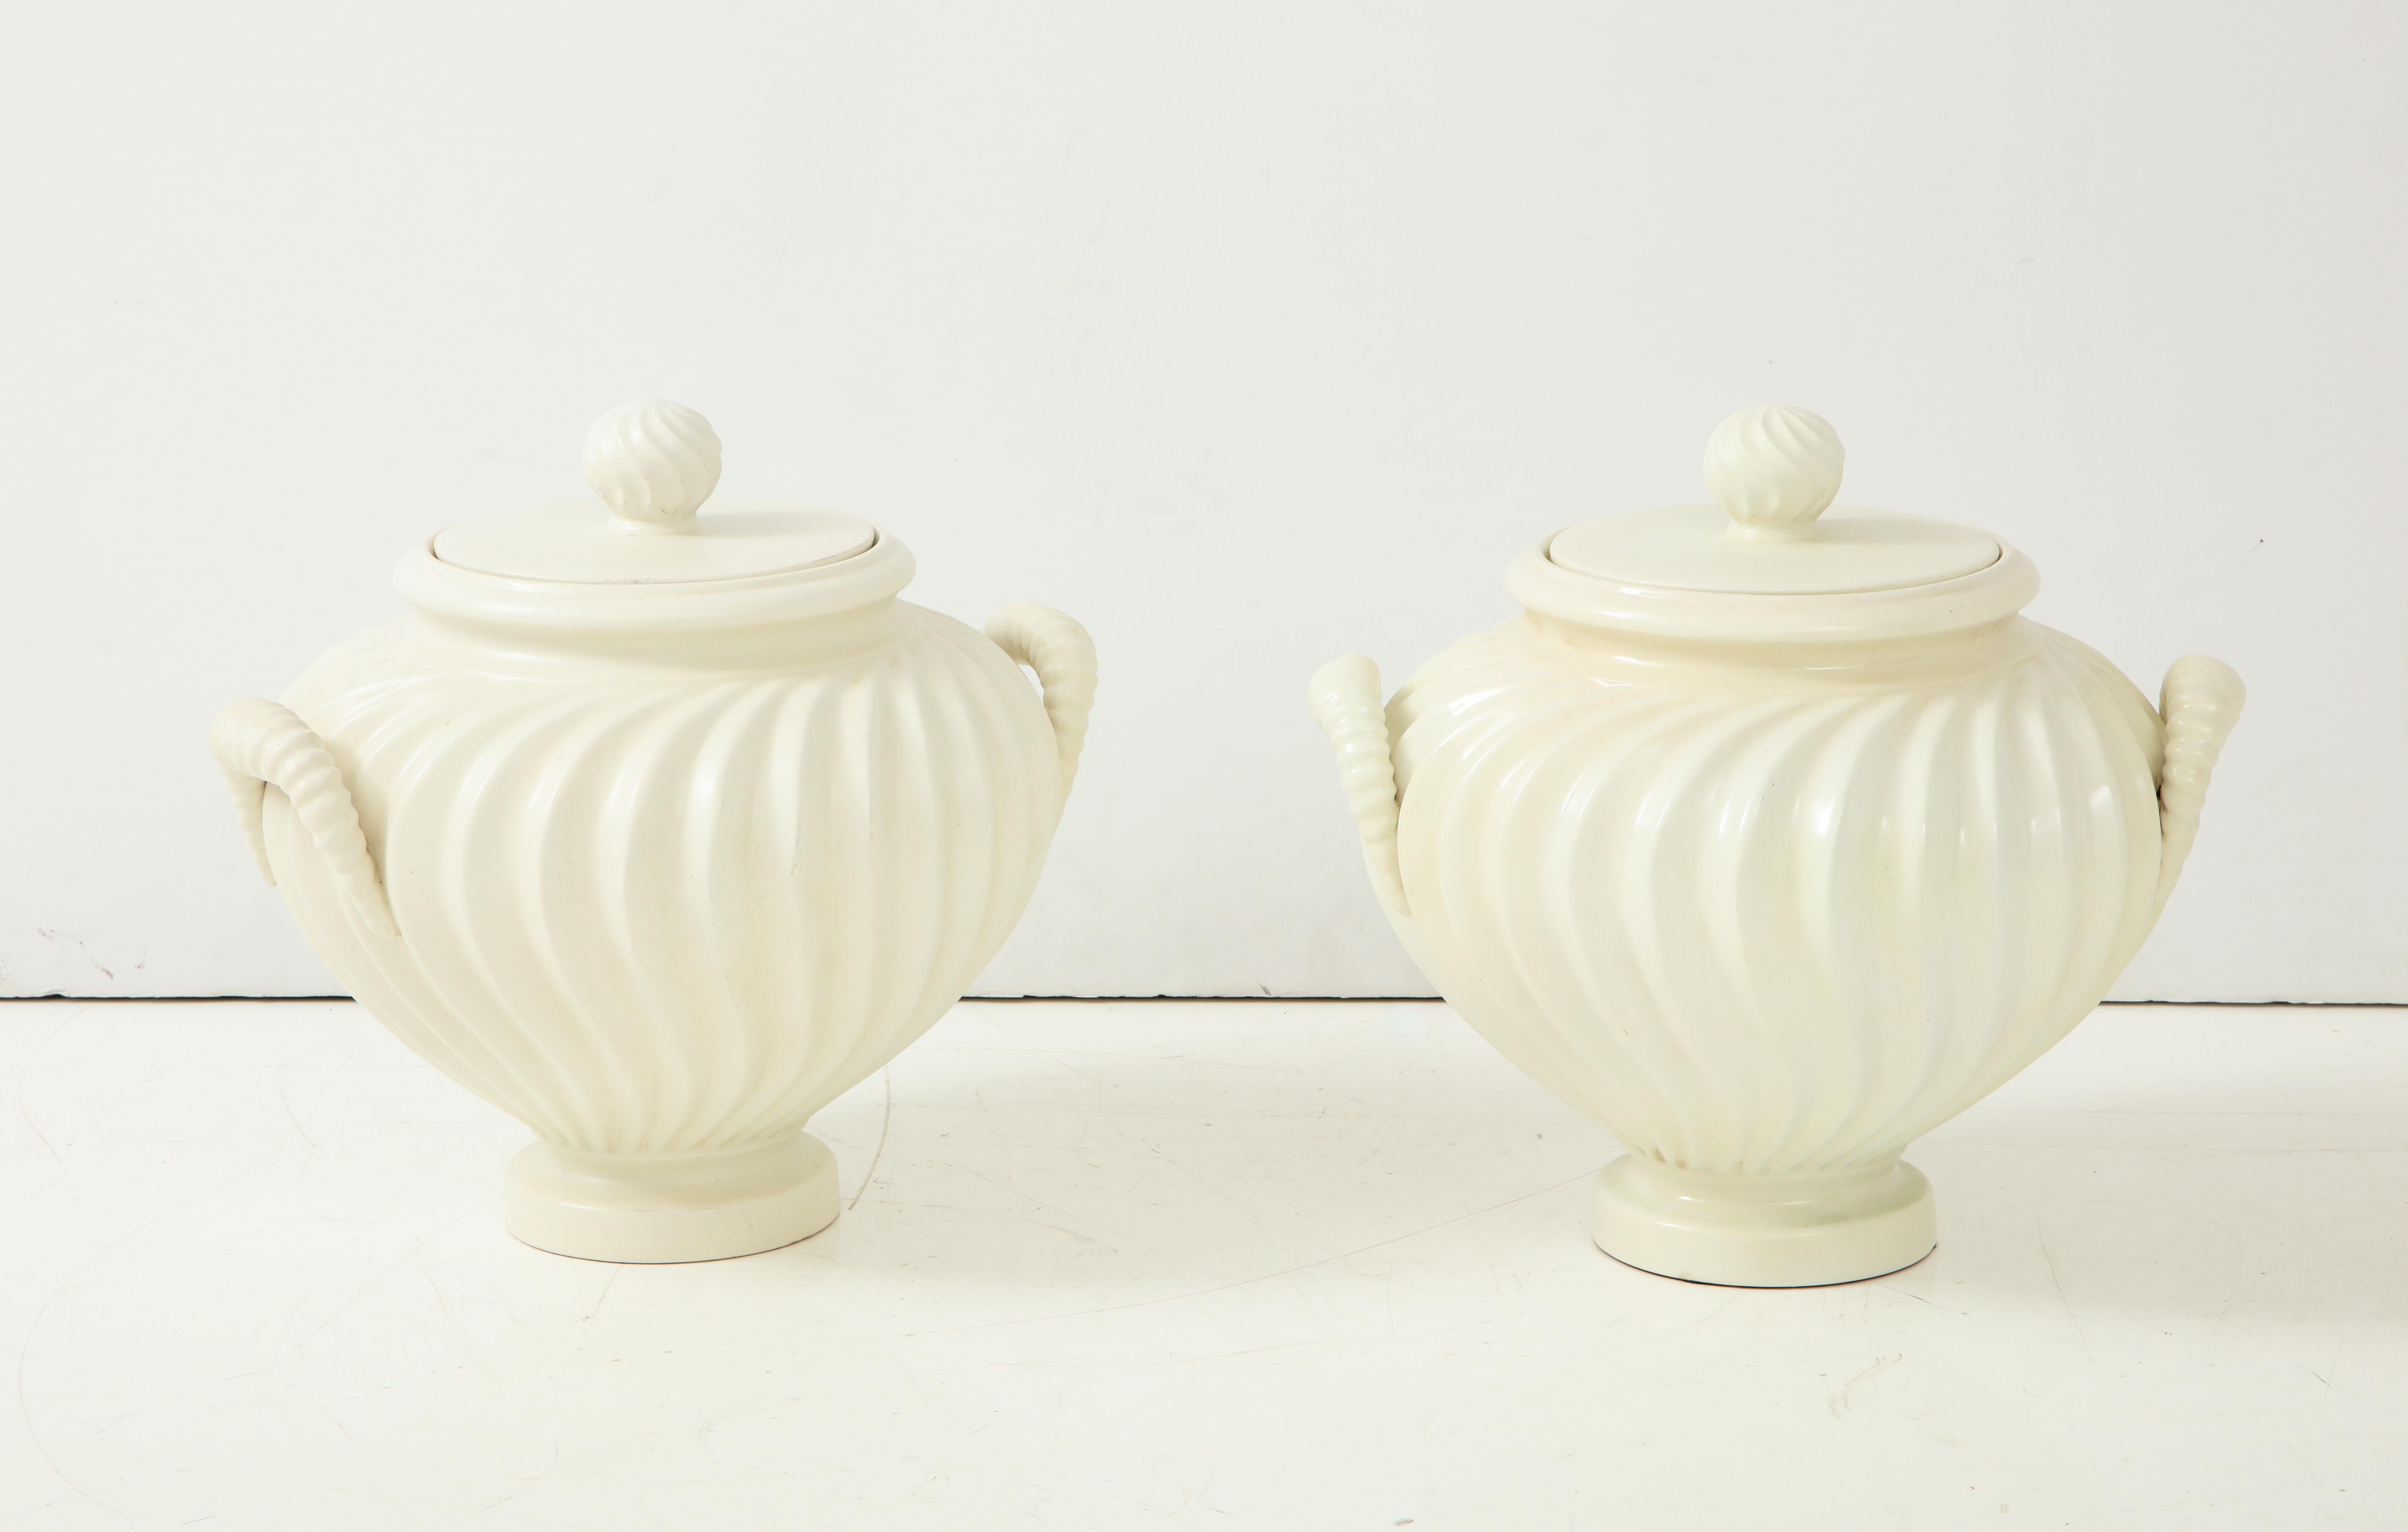 Pair of Italian 1930s neoclassical white ceramic vases with lid, decorated with ‘strigilature’ (decoration with wavy grooves or spiral fluting reminiscent of the shape of the strigil, carved on the surface of marbles, such as baccellature,